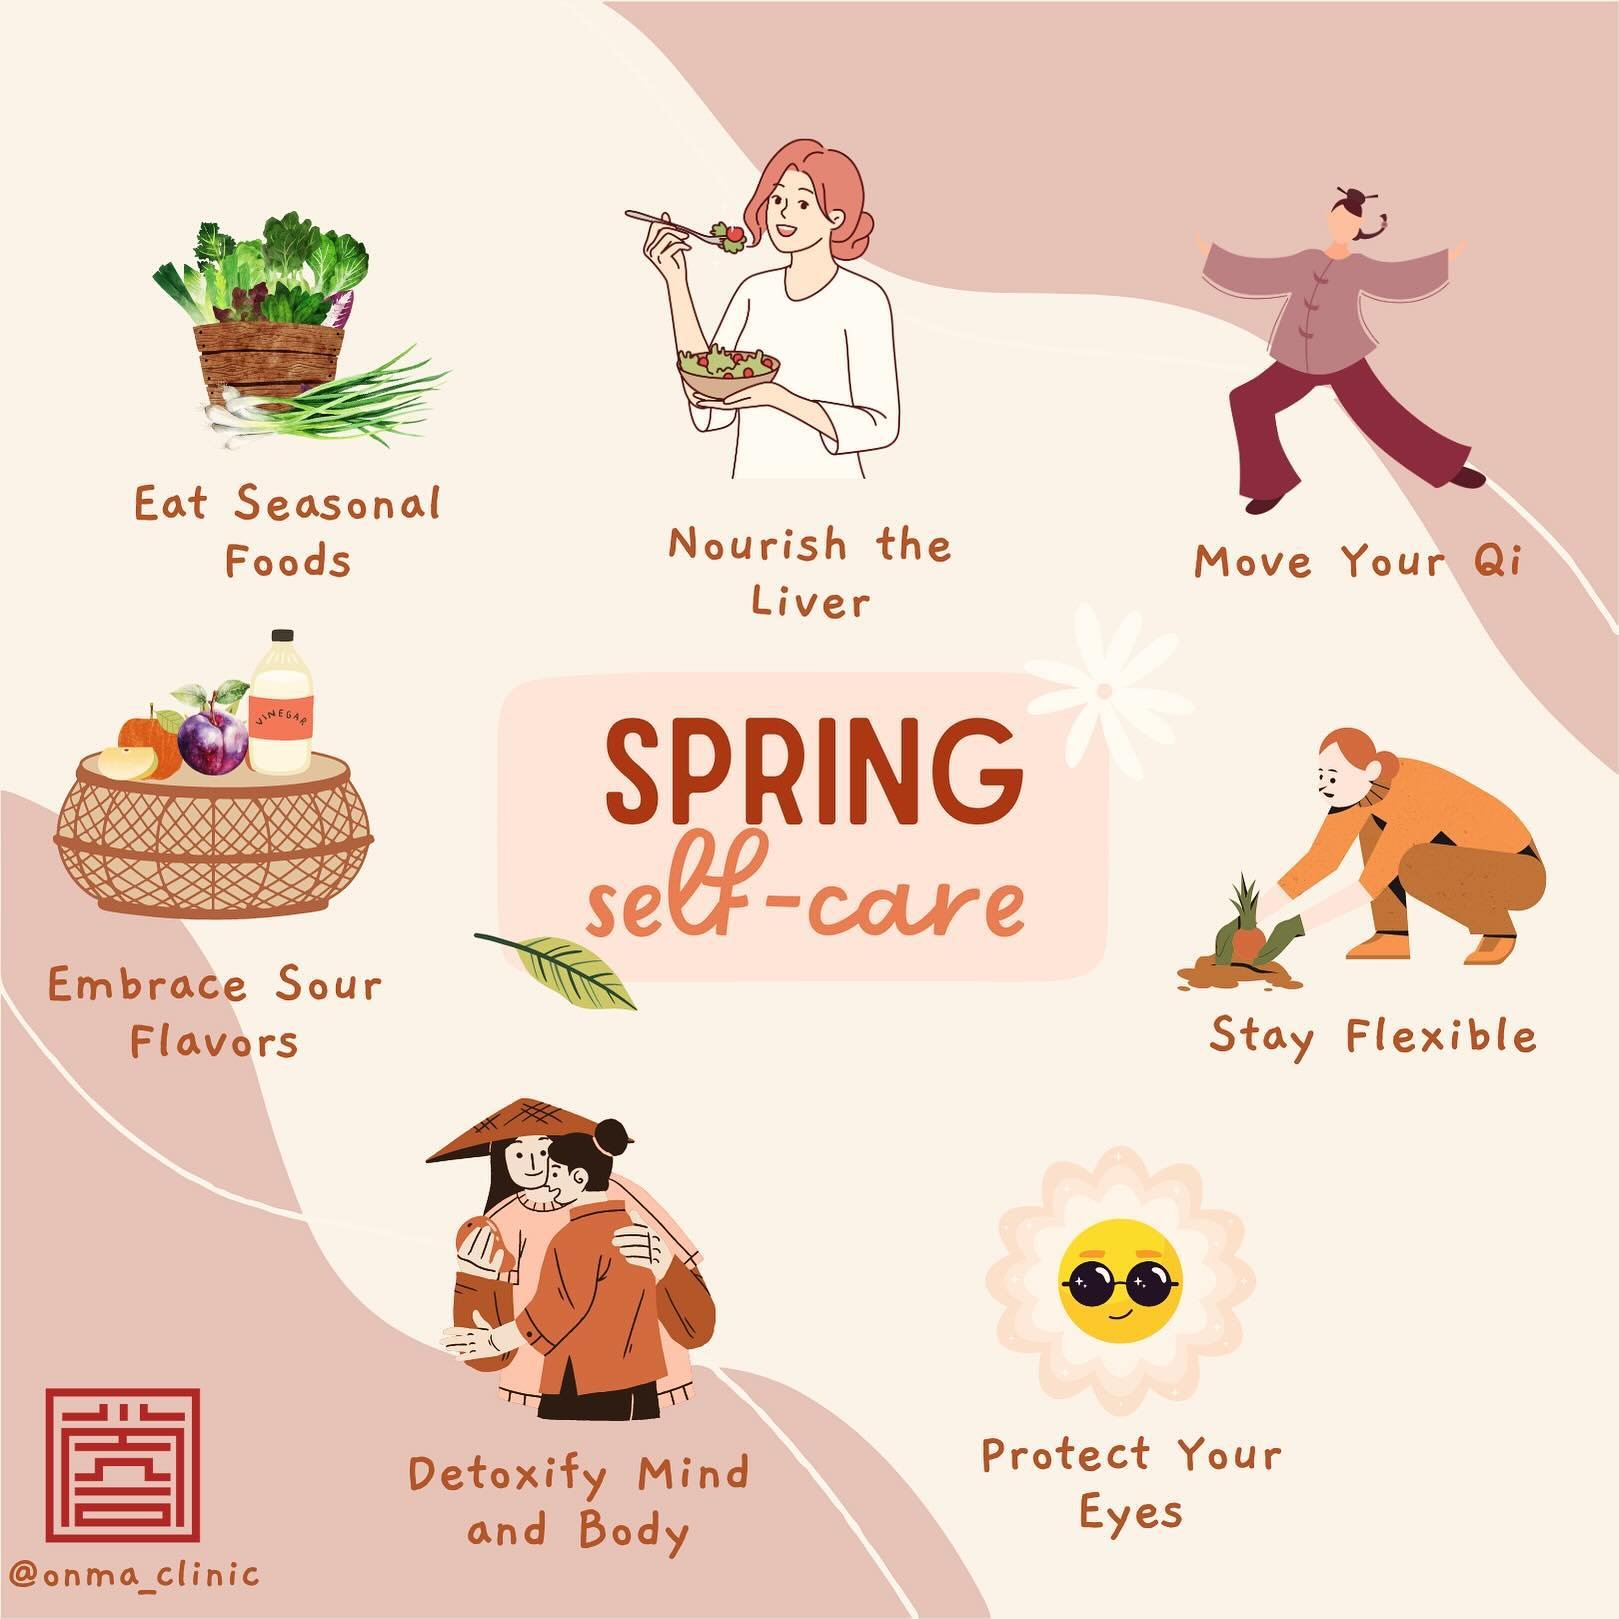 Nourishing the liver is vital for spring vitality! From embracing sour flavor to gentle exercises like Tai Chi, supporting your liver health can promote balance , detoxification, and smooth energy flow. Incorporate seasonal foods and stay flexible to